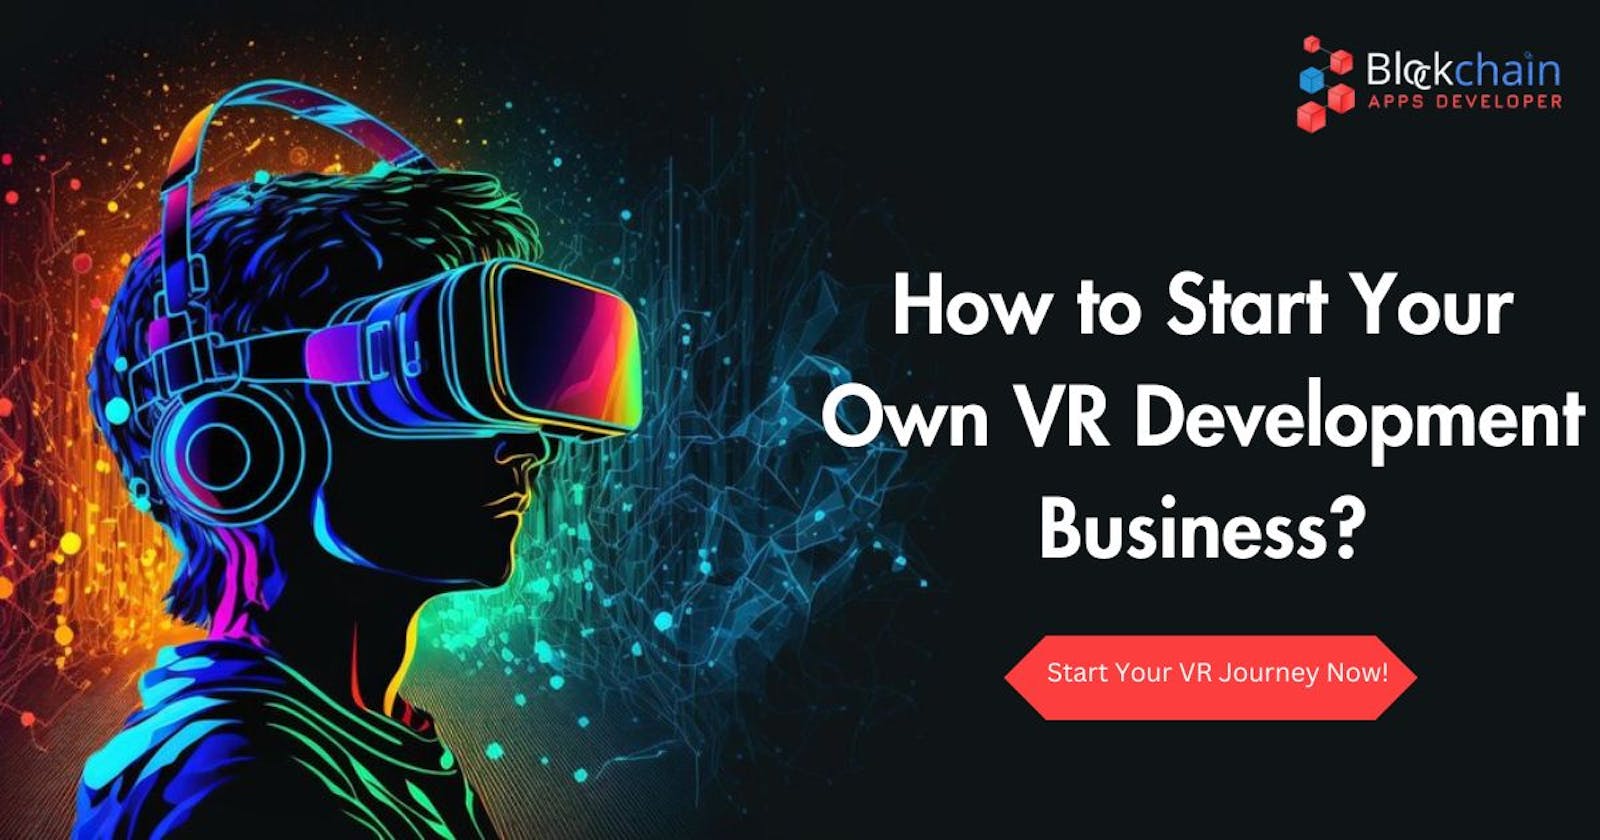 How to Start Your Own VR Development Business?